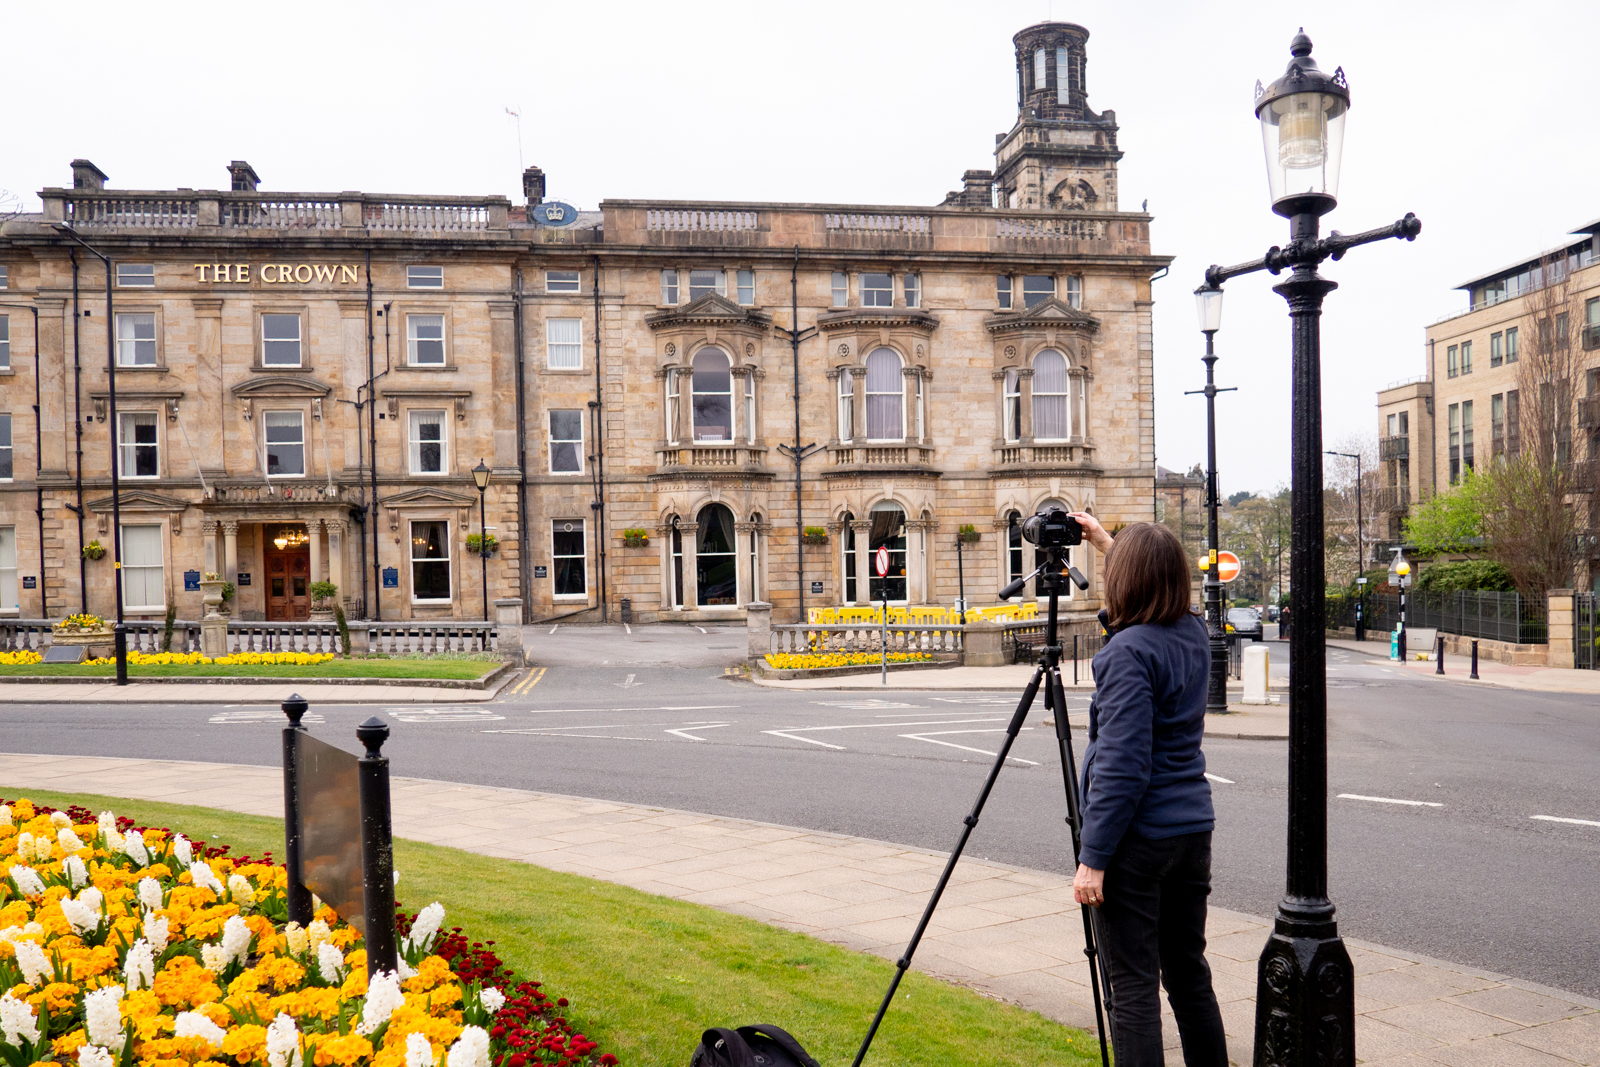 Behind the scenes photographing The Crown Hotel Harrogate